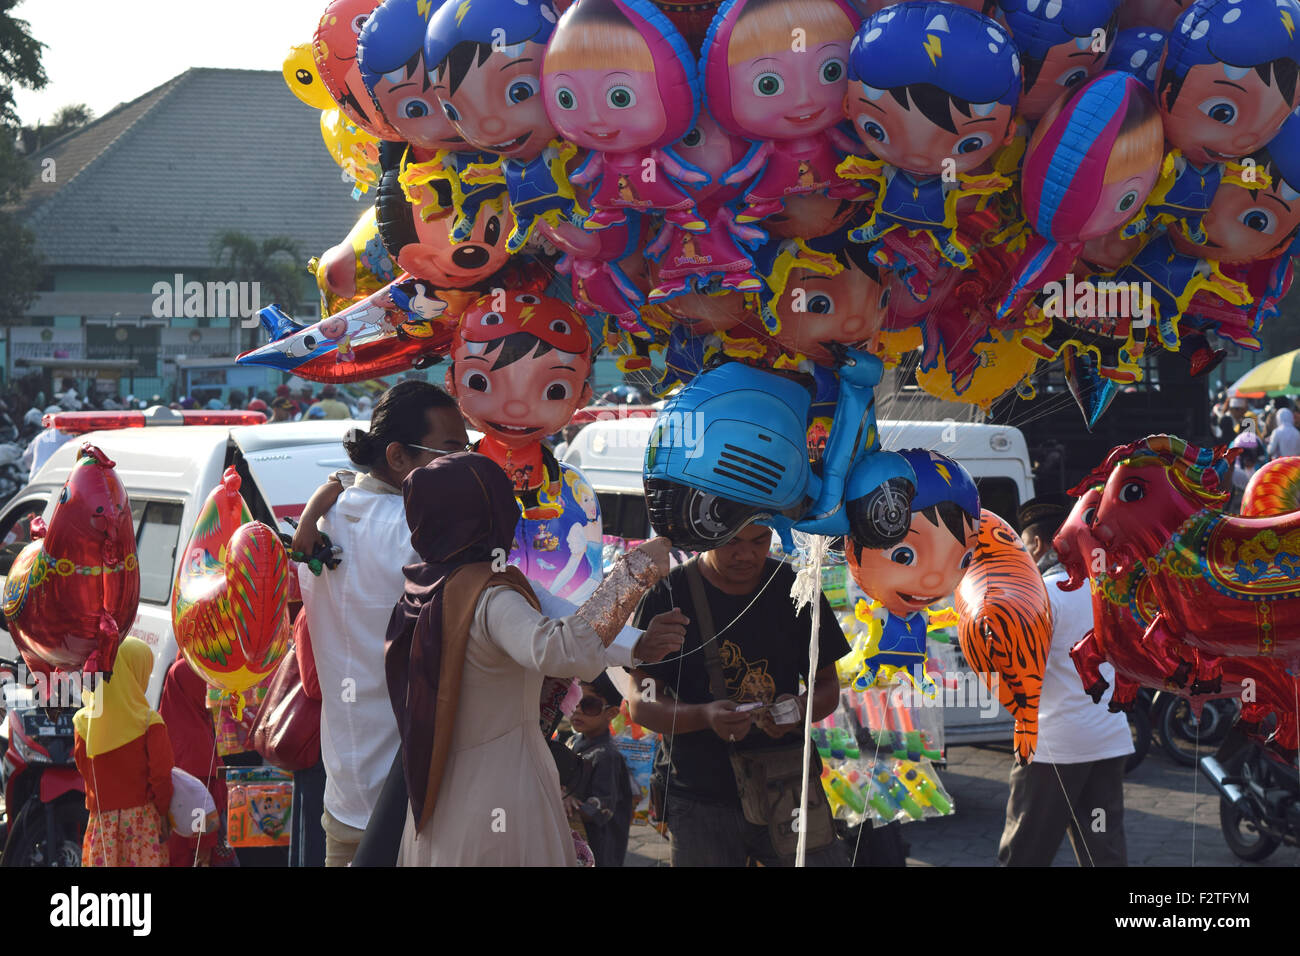 Surabaya, Indonesia - September 24, 2015: Merchants sell a toy children to welcome muslims are celebrating Eid al-Adha in Al Akbar mosque in Surabaya, East Java, Indonesia, September 24, 2015. Indonesia, which is a country with the largest Muslim population in the world, celebrate Eid al-Adha by praying and slaughtering cow or goat to commemorate The Prophet Ibrahim's willingness to sacrificed his son in order to fulfill a demand from Allah Credit:  dodo hawe/Alamy Live News Stock Photo